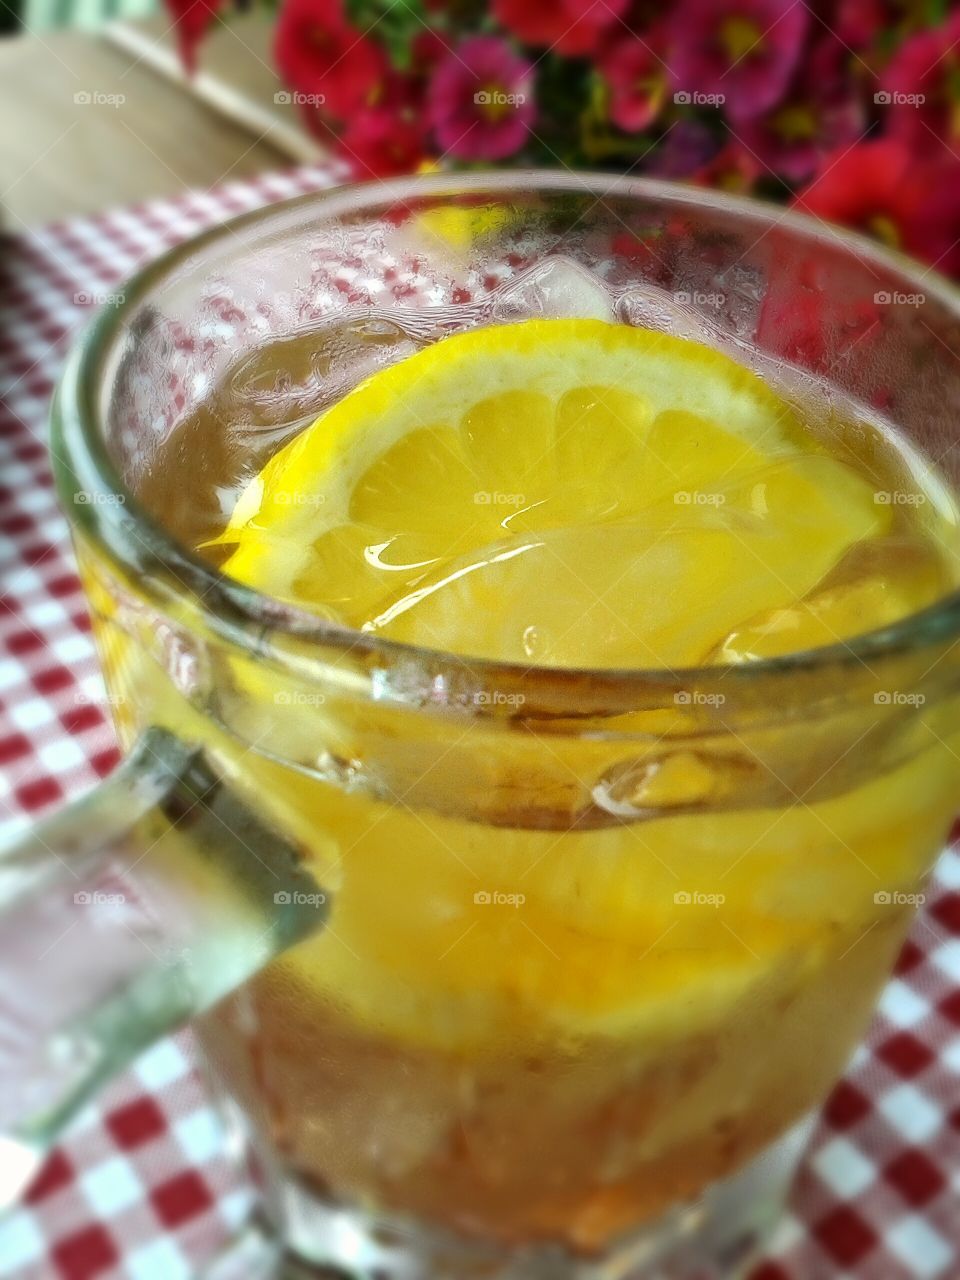 Fast refreshment lemon iced tea.. A single pleasure, no frills just chills. Hanging out on the patio and chilling with my friend.